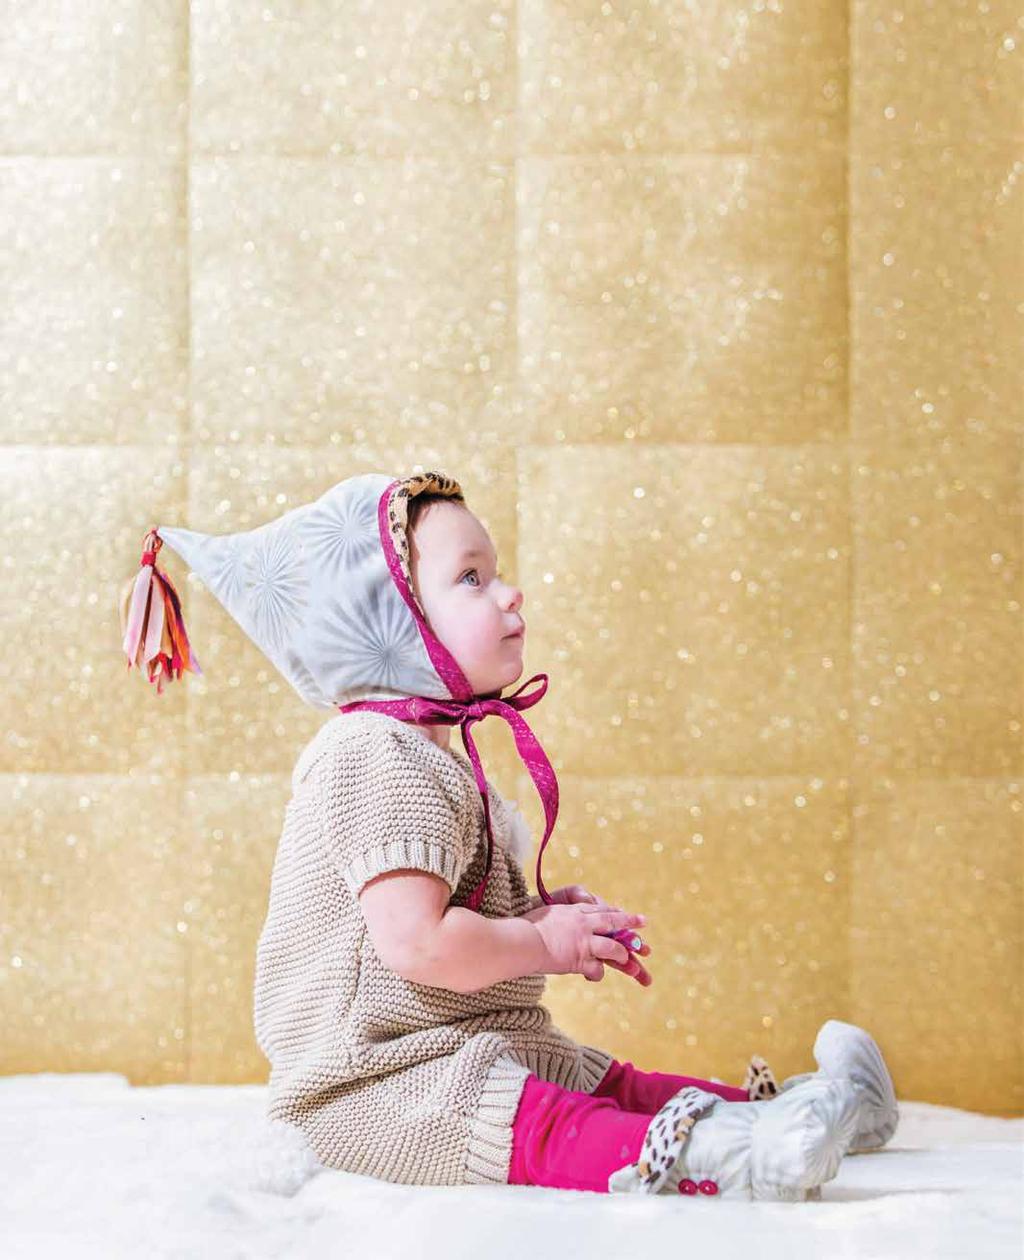 Pixie Hat and Boots by Sue Kim from her book Baby Boutique -Stash Books Jennifer s Tip Lined